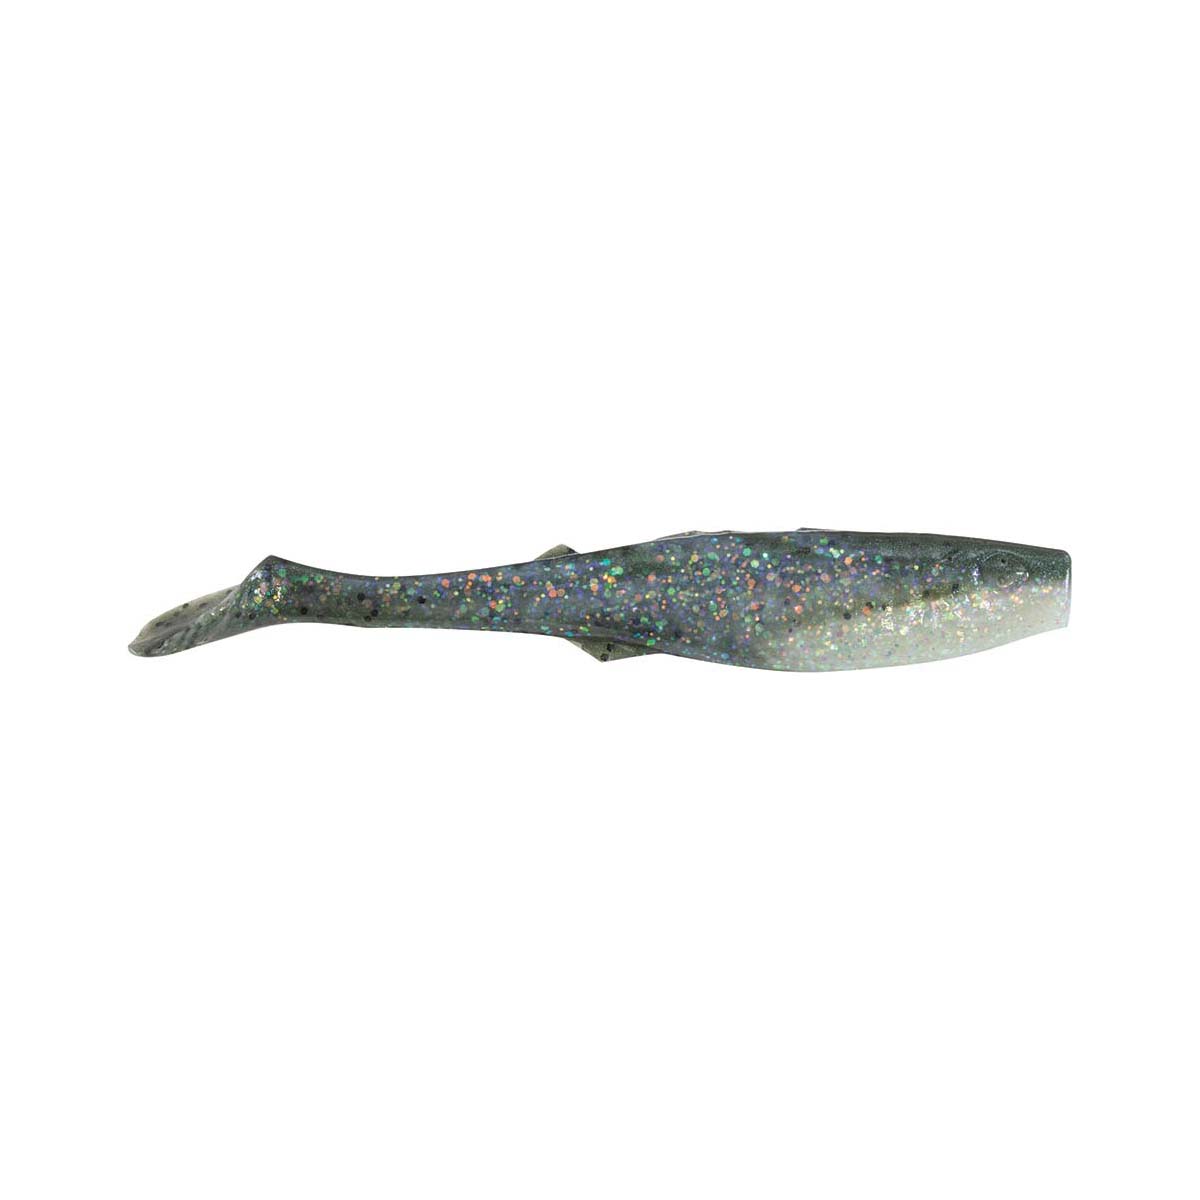 Berkley Gulp! Paddletail Shad Soft Plastic Lure 5in Silver Molting